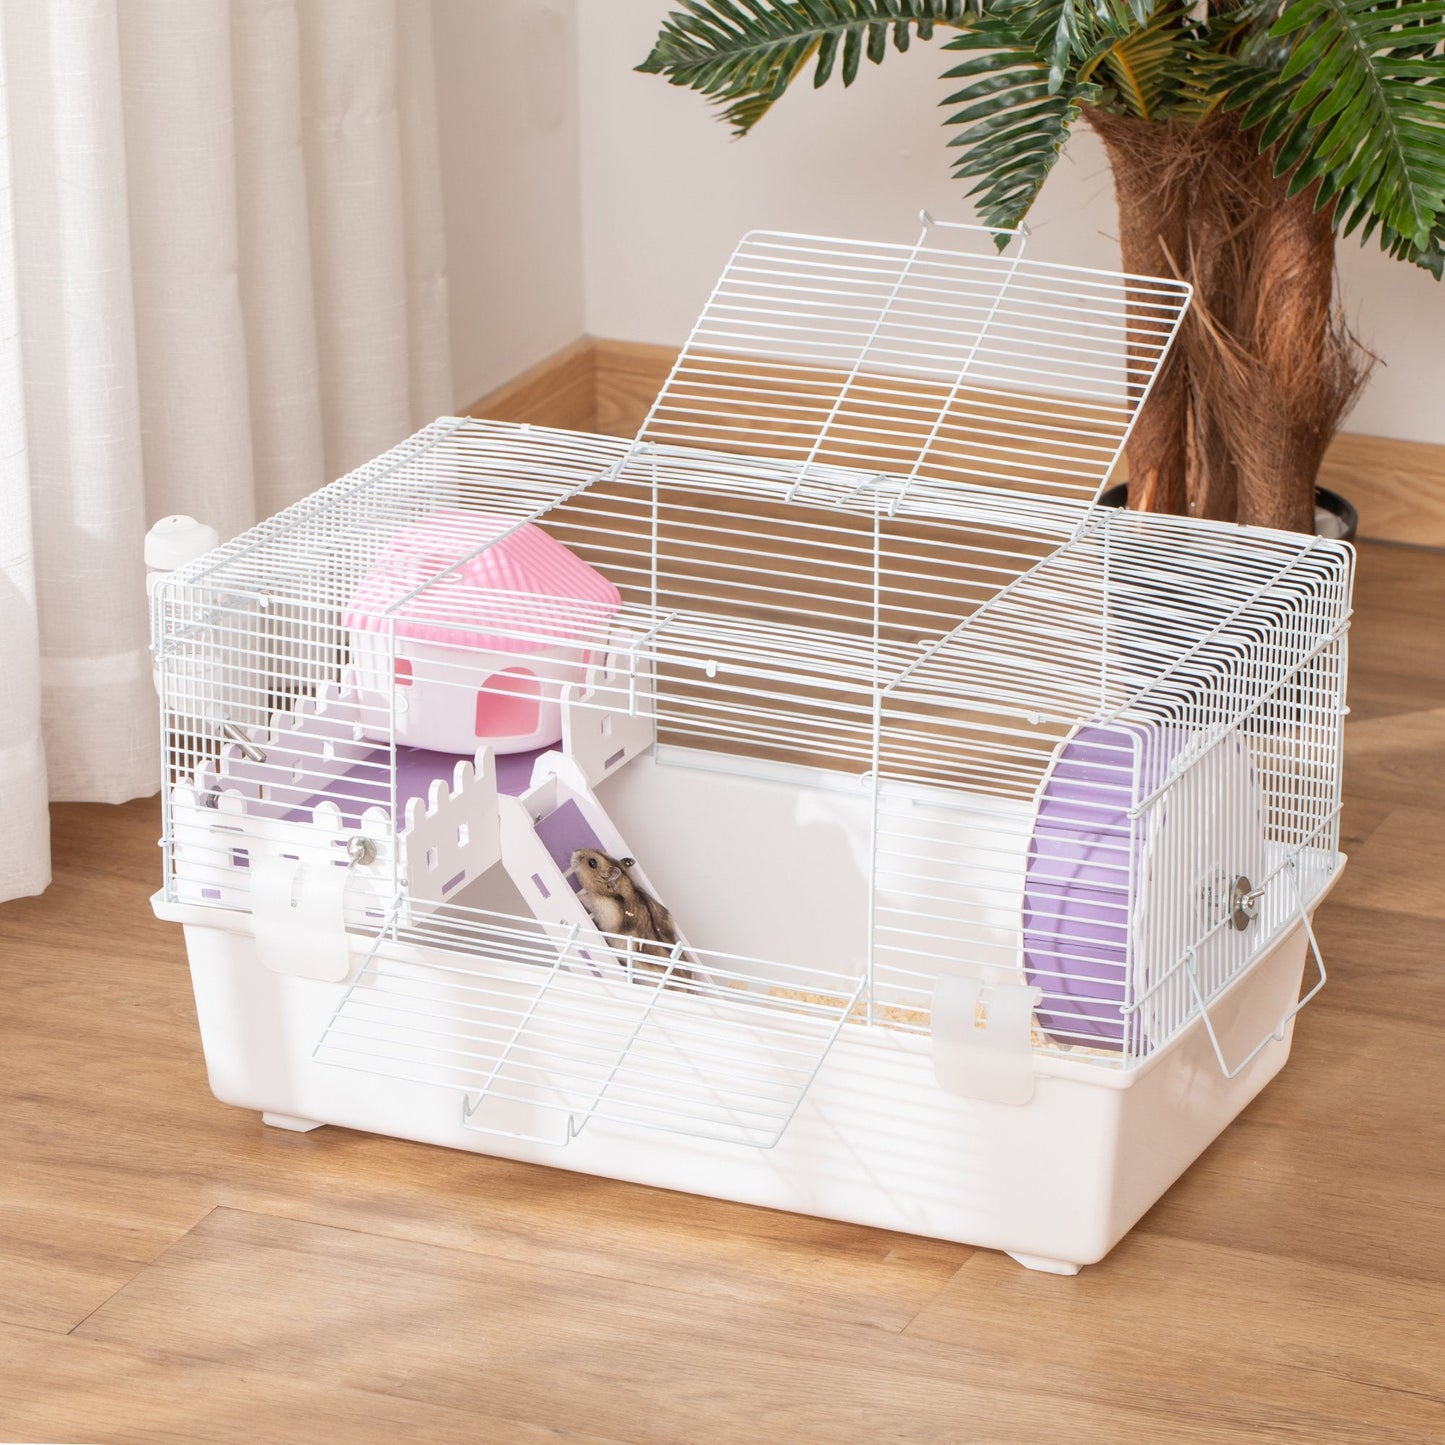 AOSOM-2 Tier Hamster Cage, Multi-Storey Rodent House Small Animal Habitat with Water Bottle, Excise Wheel, Ladder, Hut, White - Outdoor Style Company